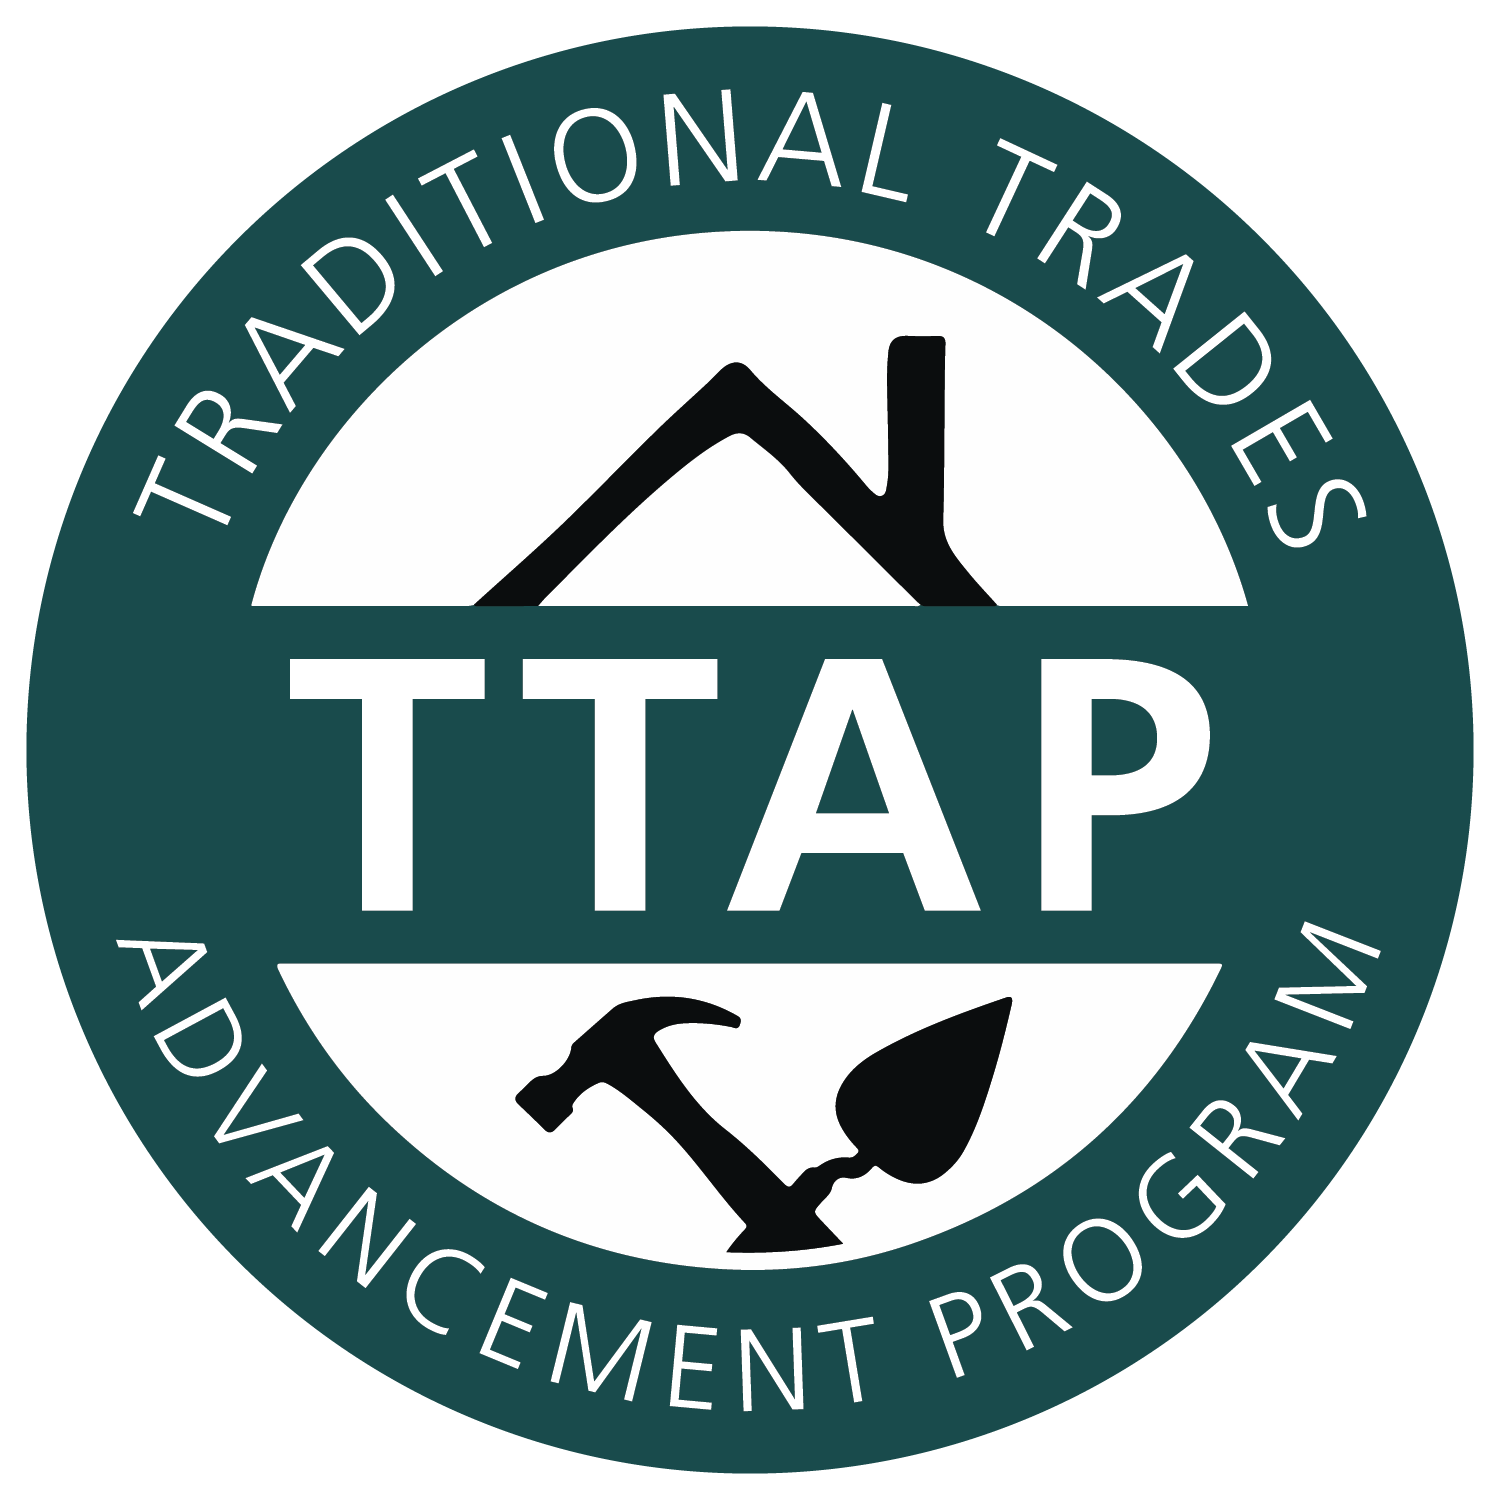 Logo with the words "Traditional Trades Advancement Program" around the outside, a house, and two tools within the logo.